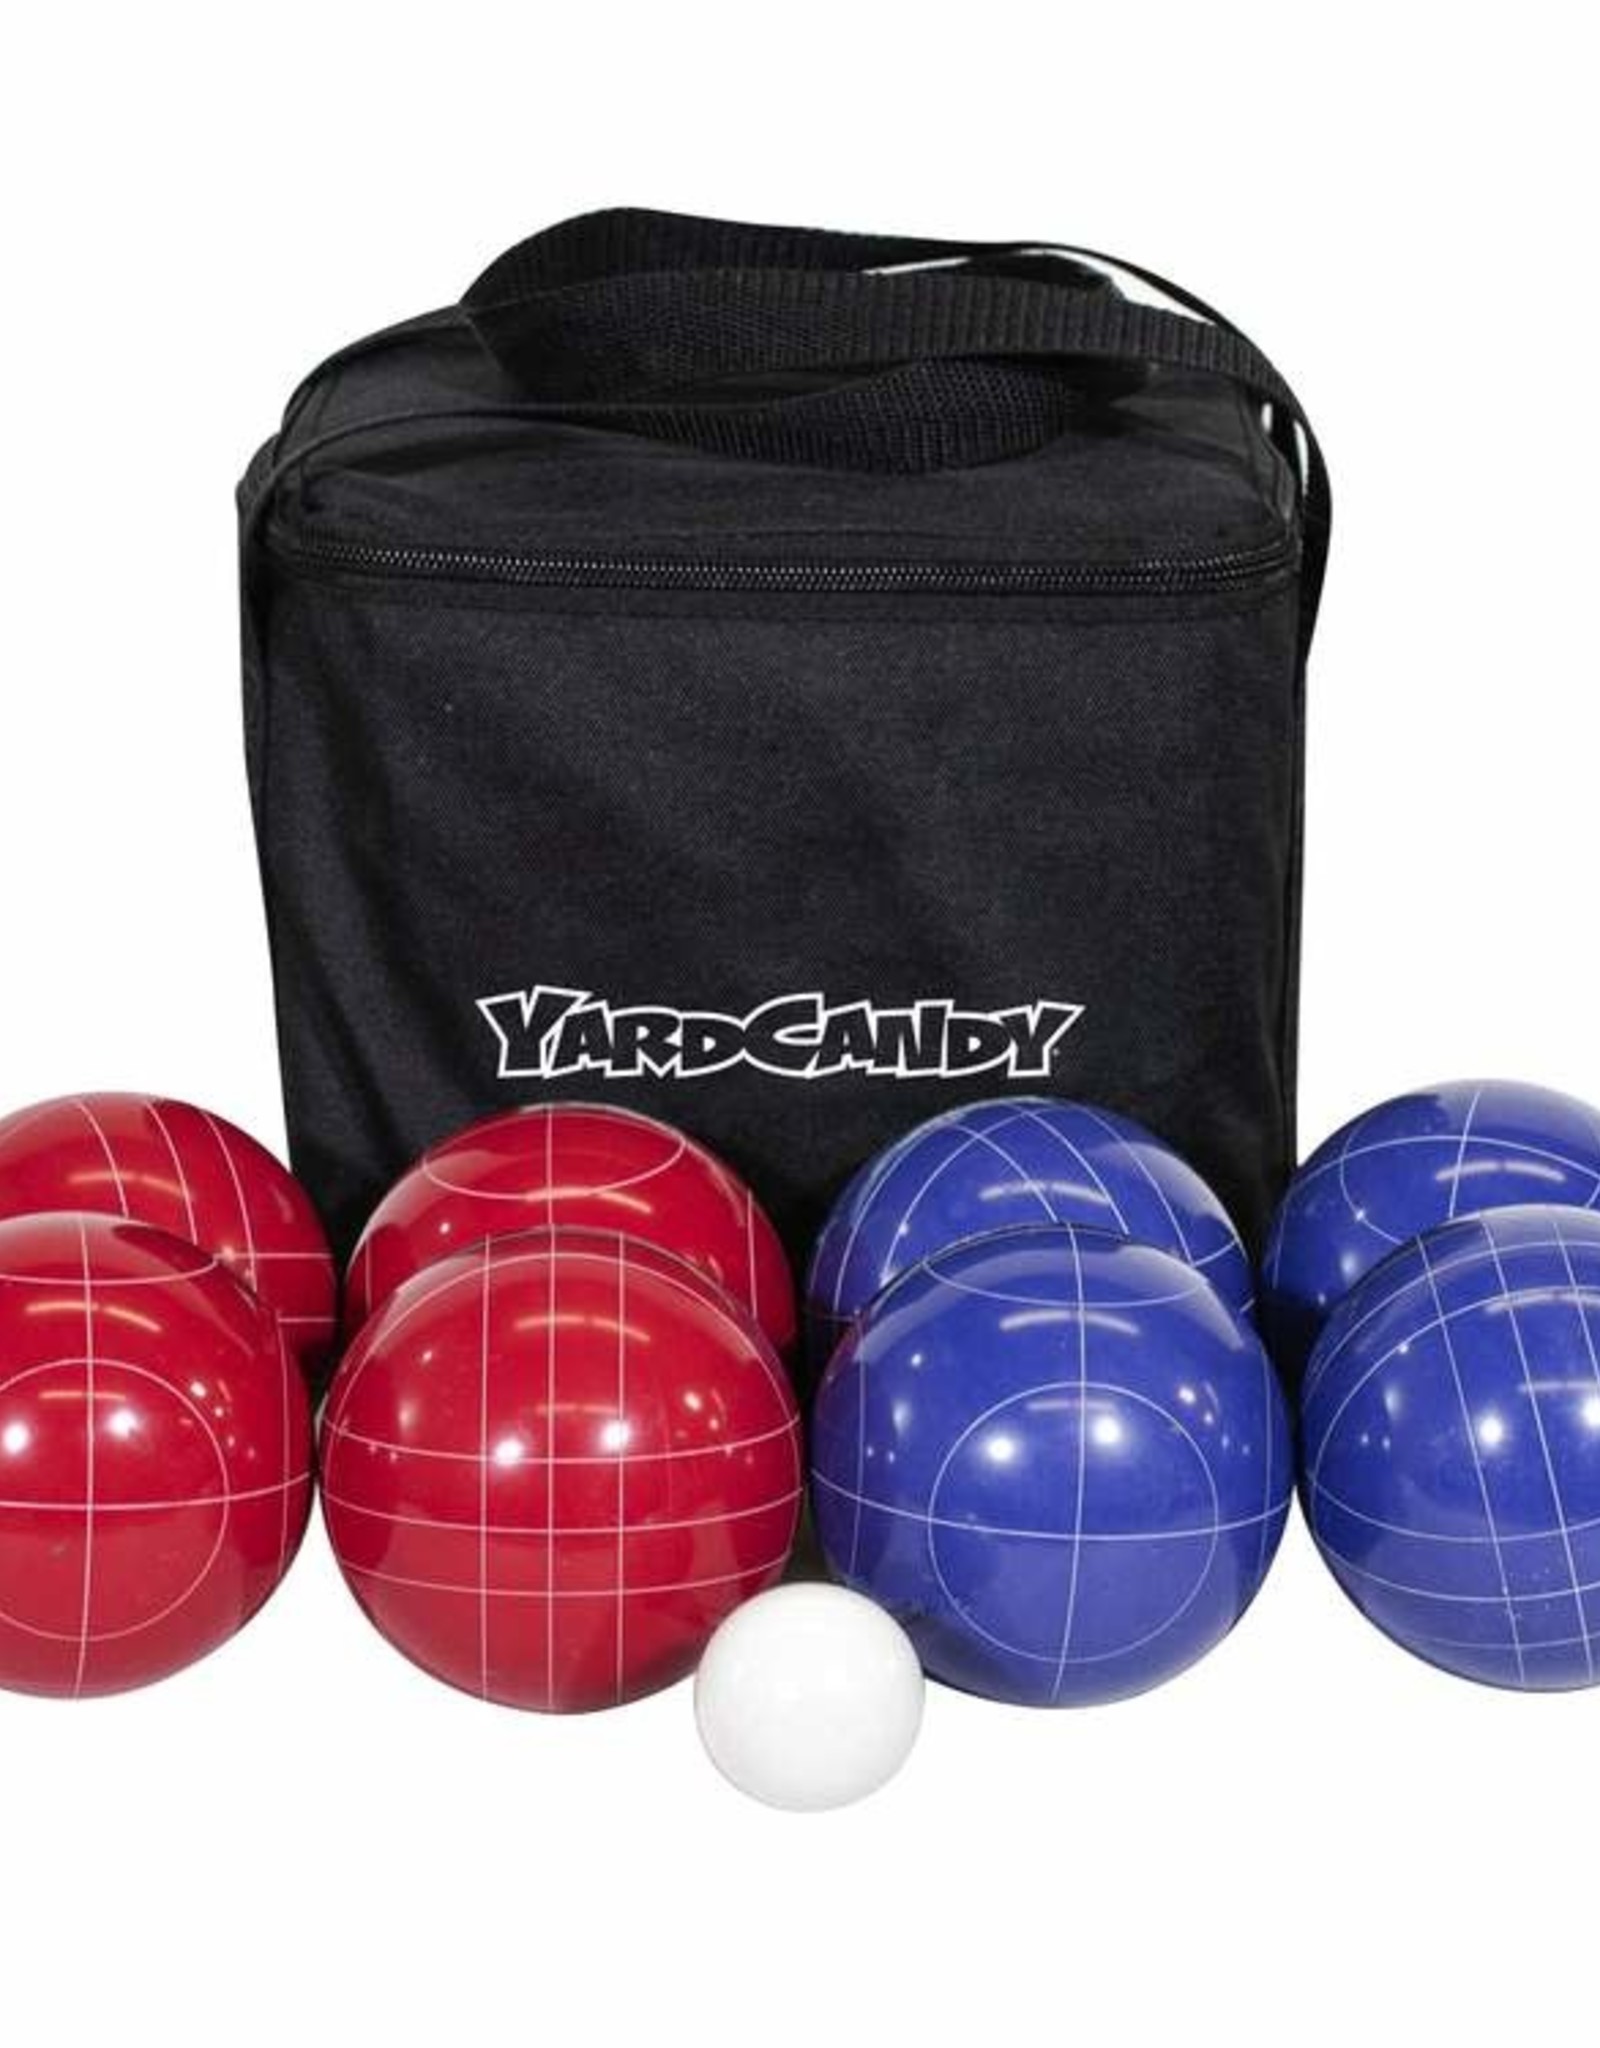 Yard Candy Deluxe Resin Bocce Ball Set with Carry Case